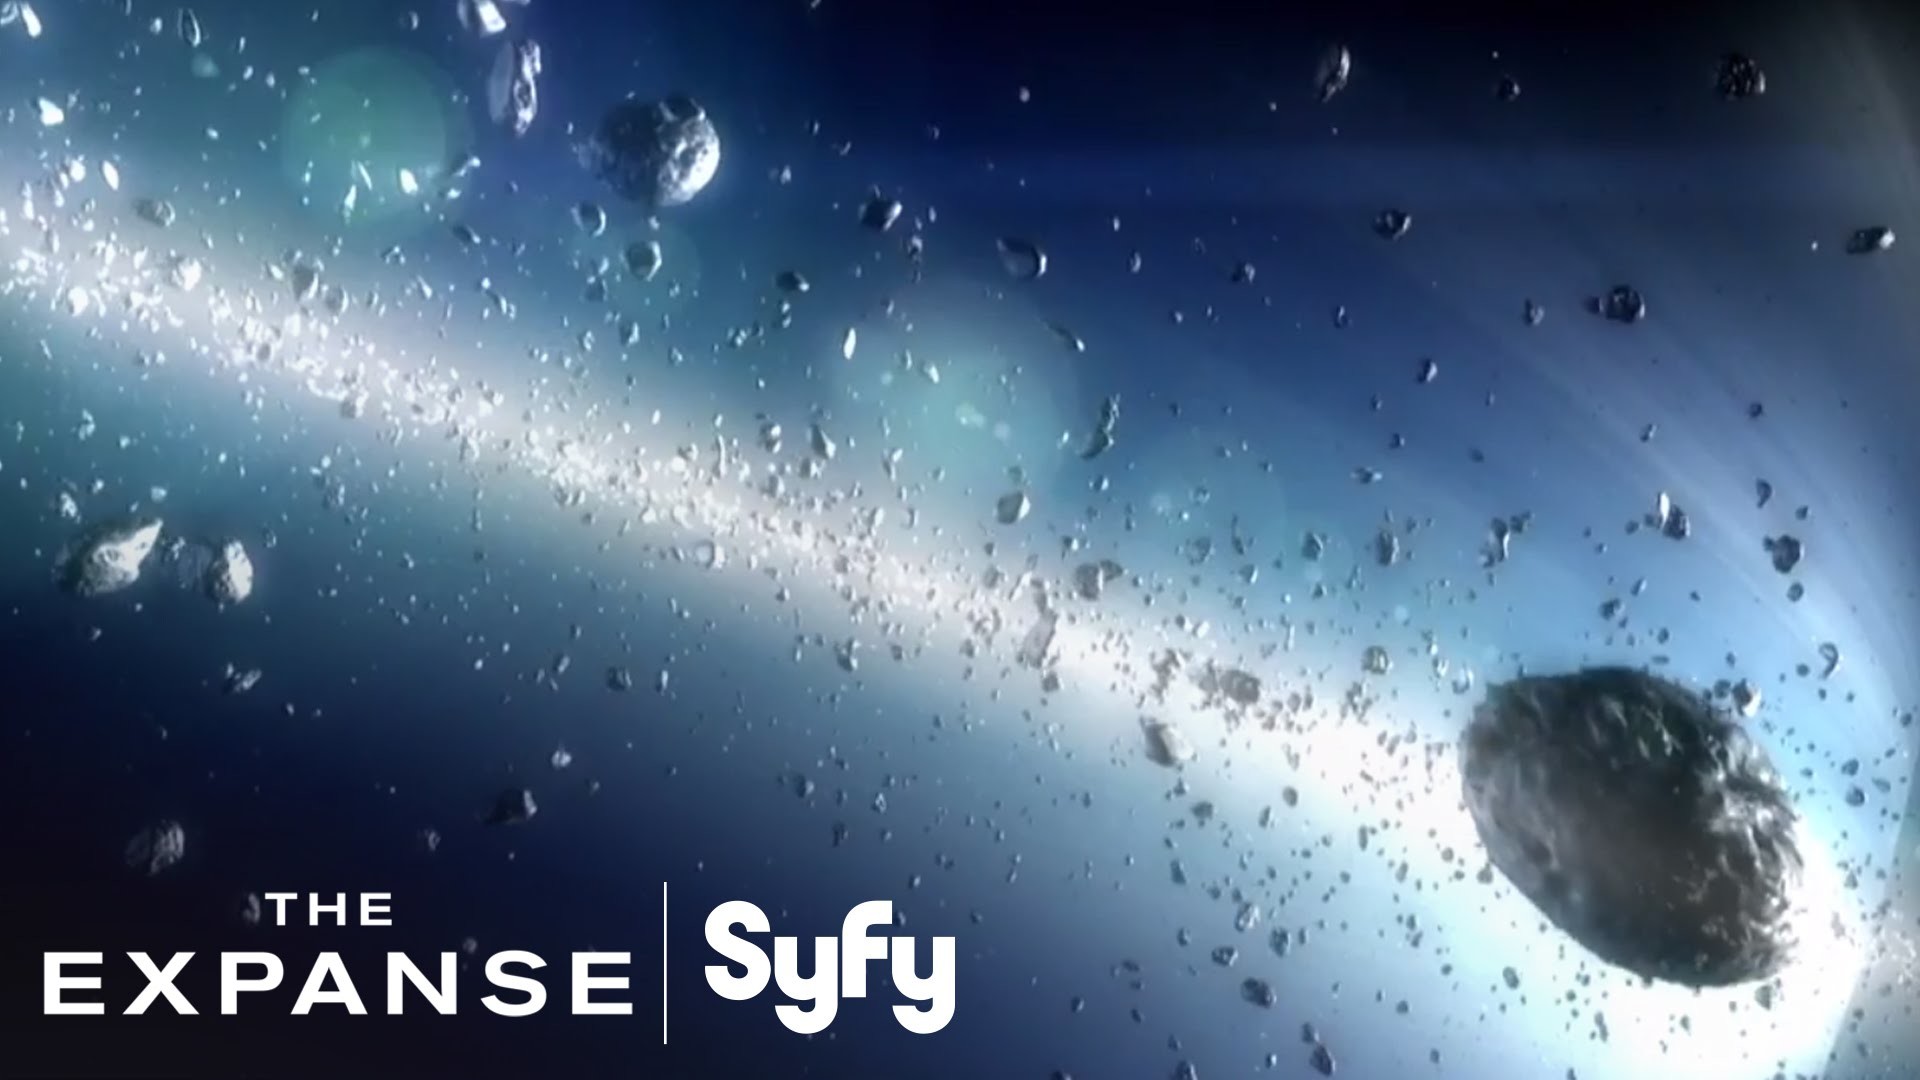 1920x1080 How THE EXPANSE Showrunner Applies His Engineering Degree to the SyFy Hit